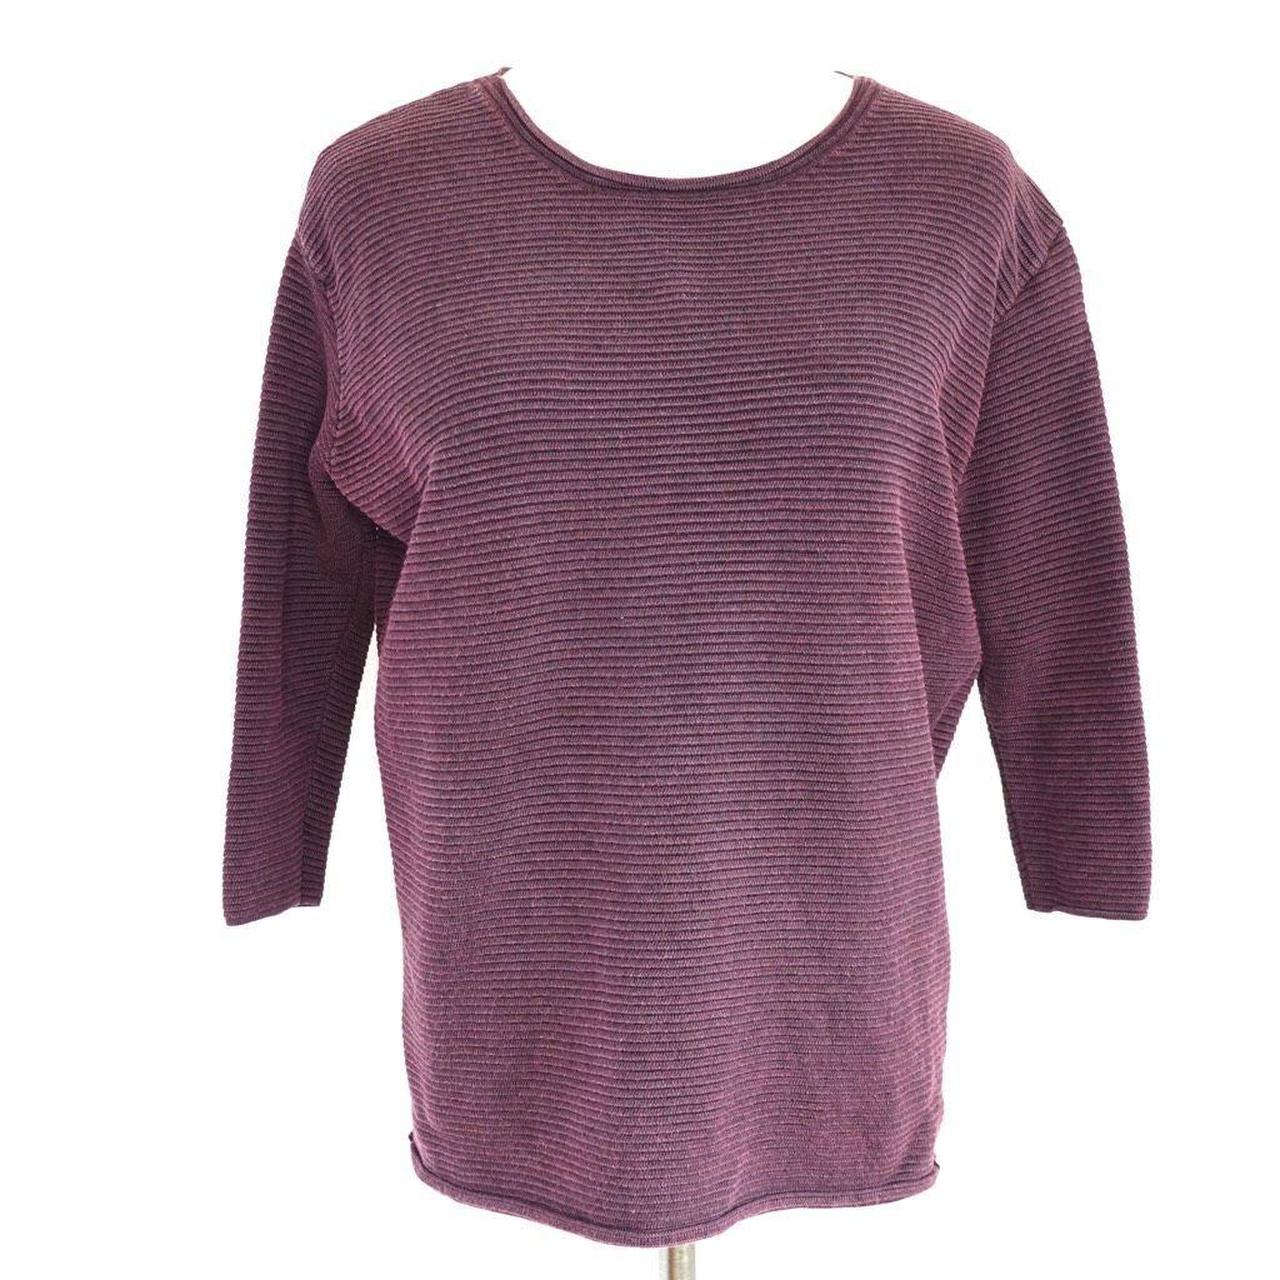 Wilfred LUXE CASHMERE MARIA SWEATER